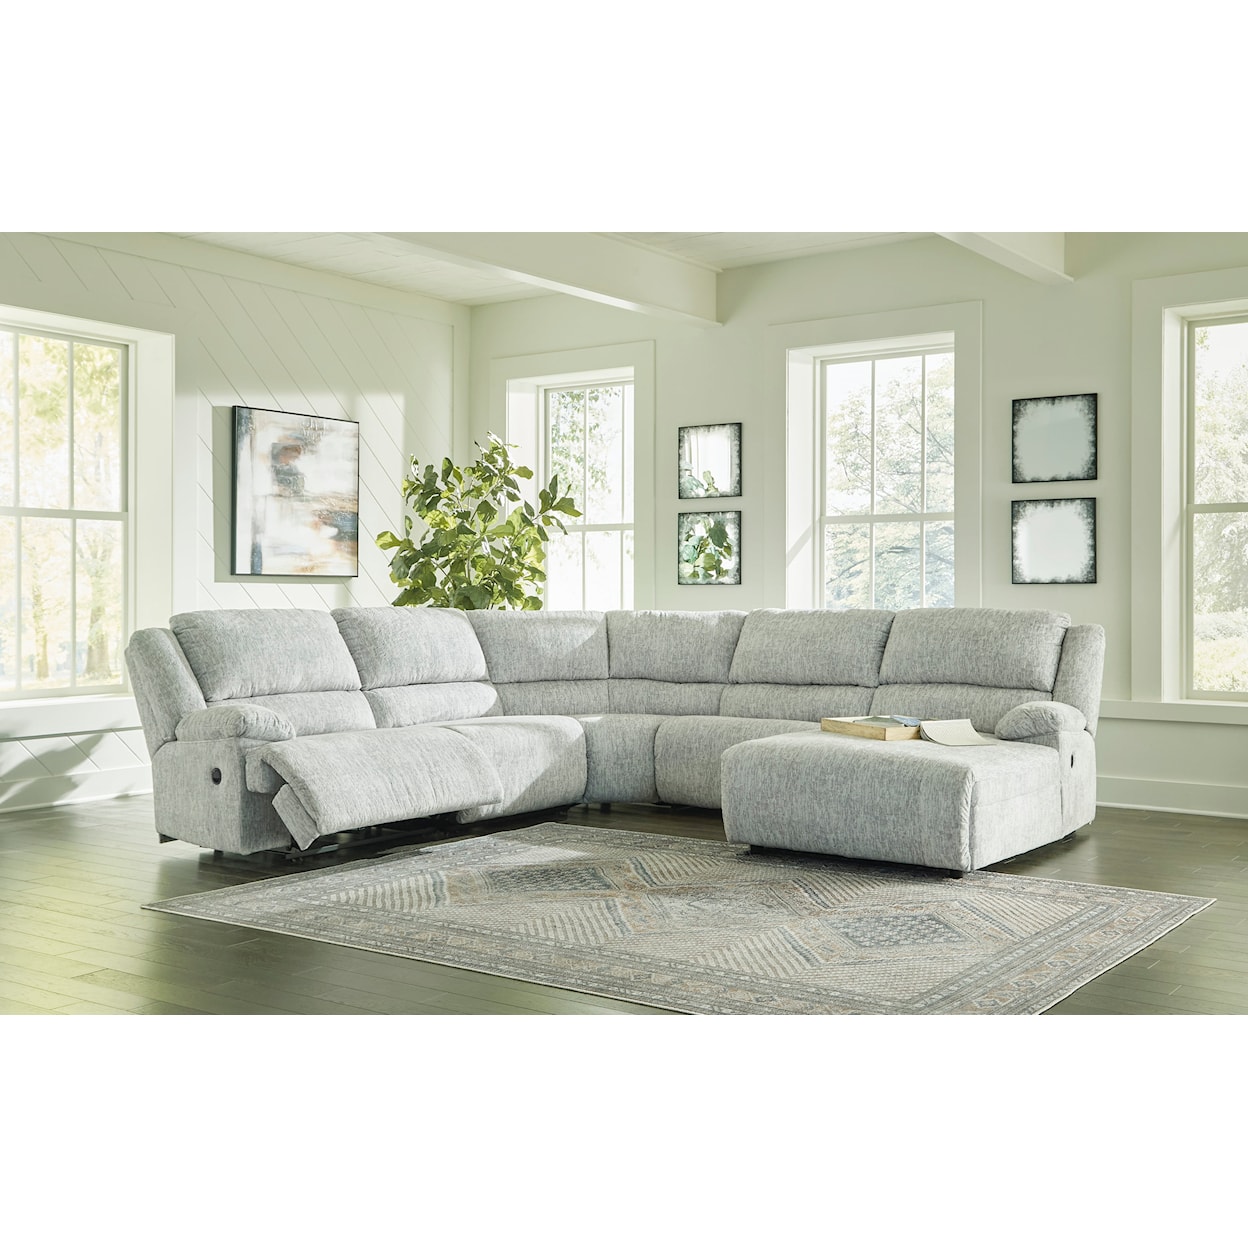 Benchcraft McClelland 5-Piece Reclining Sectional with Chaise